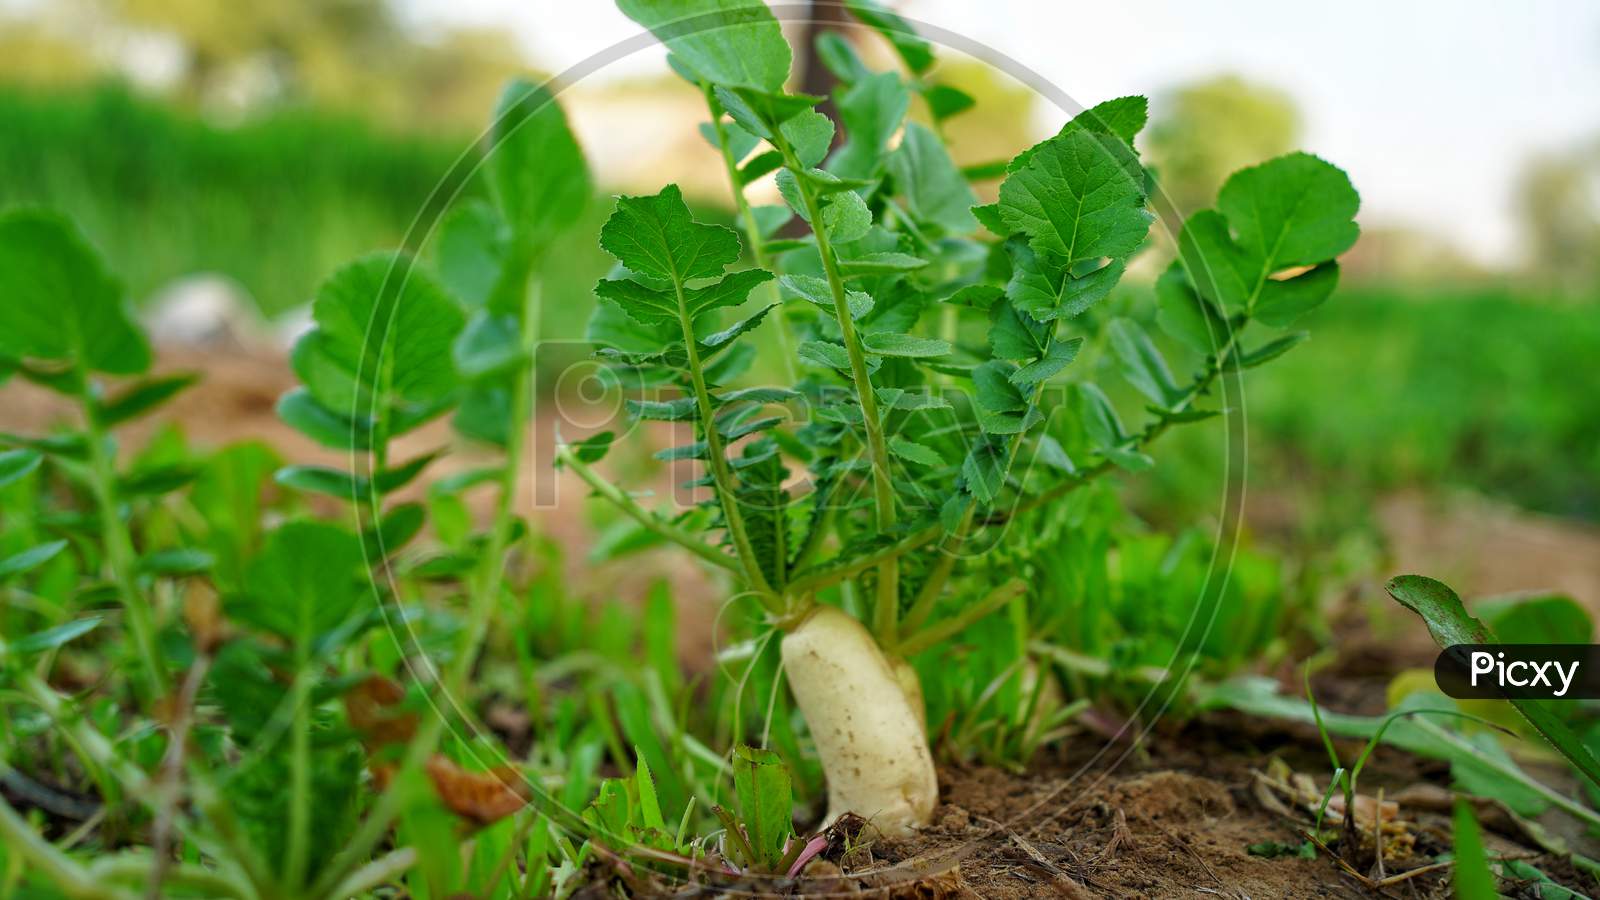 Ground Shot Of White Radish Or Daikon In Plantation With Half In Soil And Half Outside. Healthy Ingredient Plant Closeup.